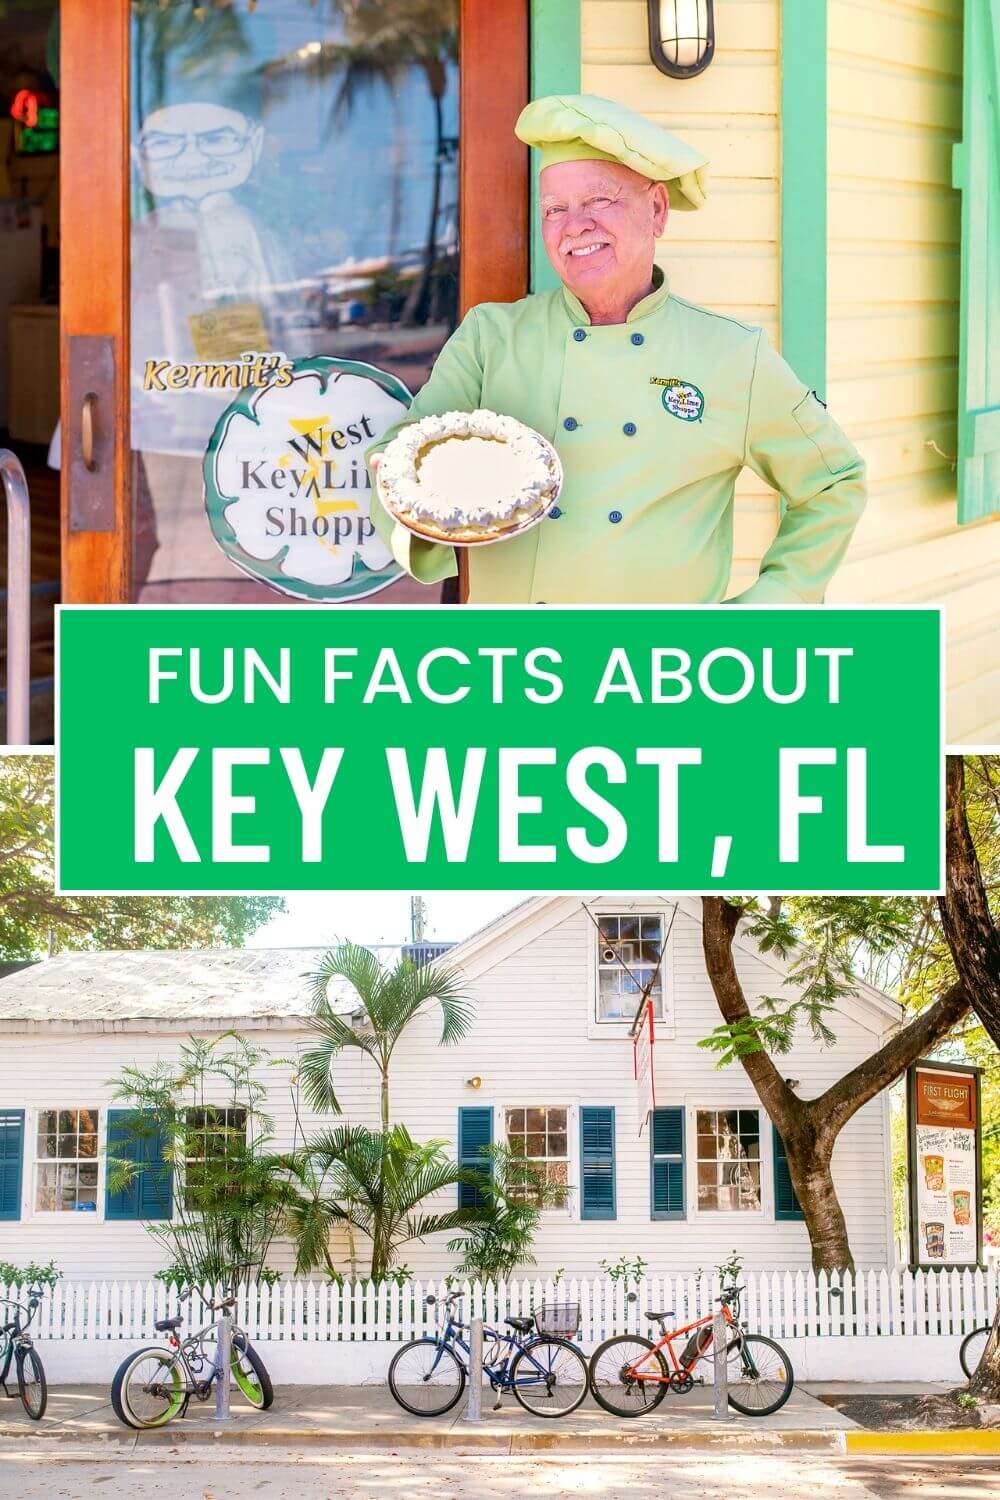 Fun Facts About Key West FL